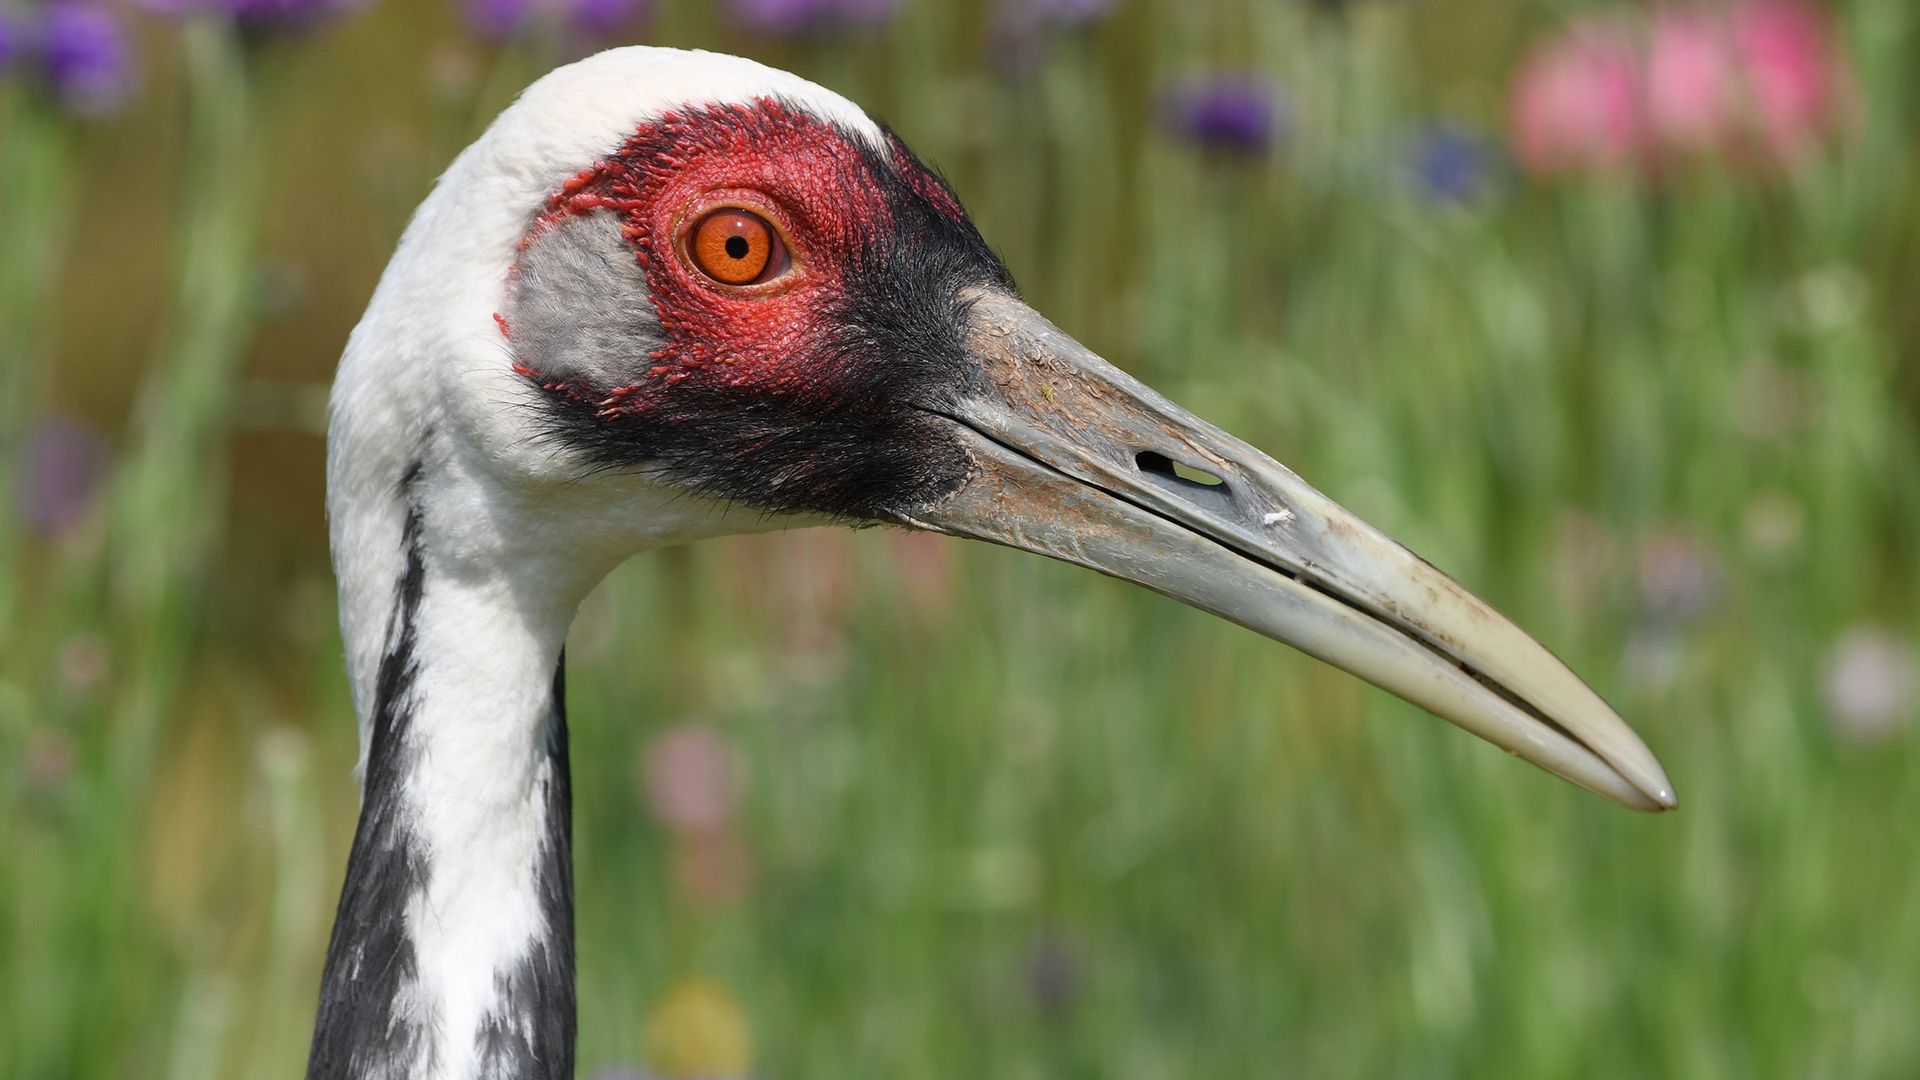 A close-up of a bird's head with a long beak and white and red markings.